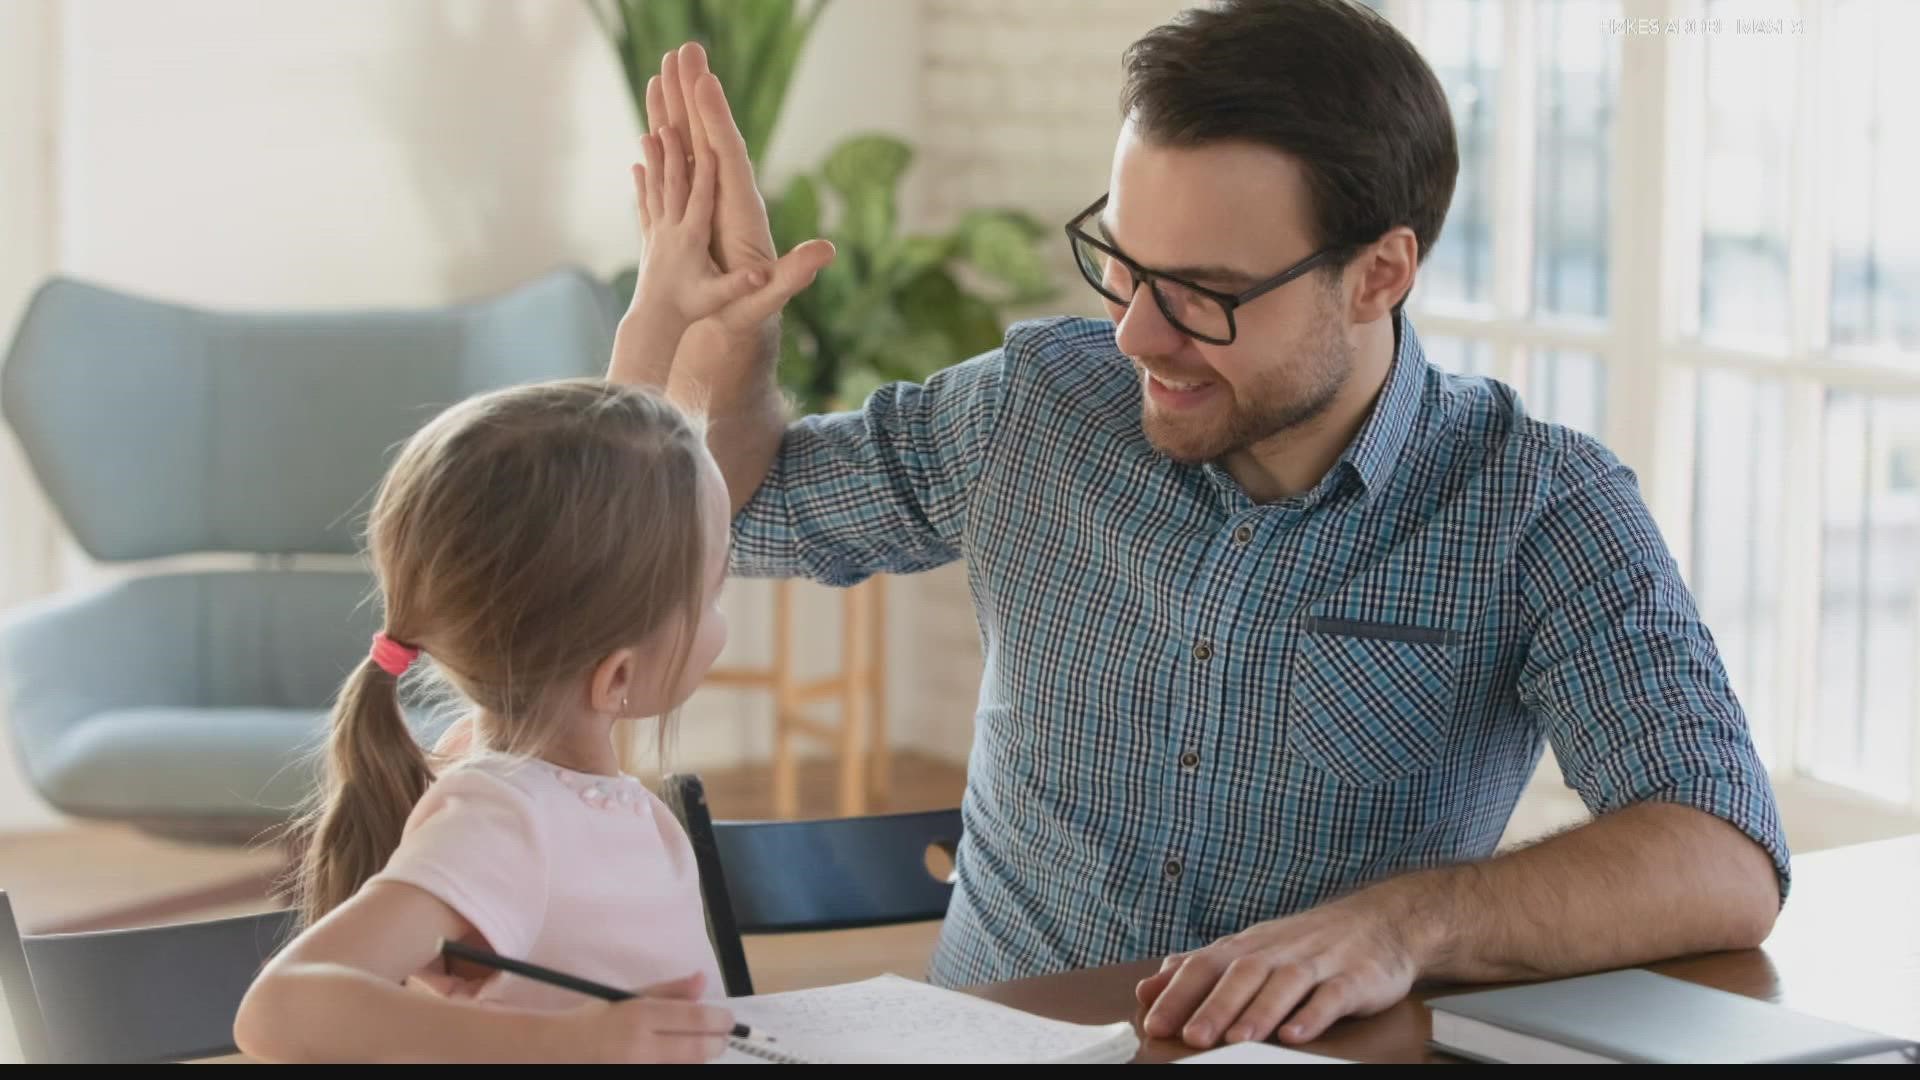 A compliment or high-five at the right moment doesn’t only make kids feel good, it teaches them pride and reinforces good behavior.